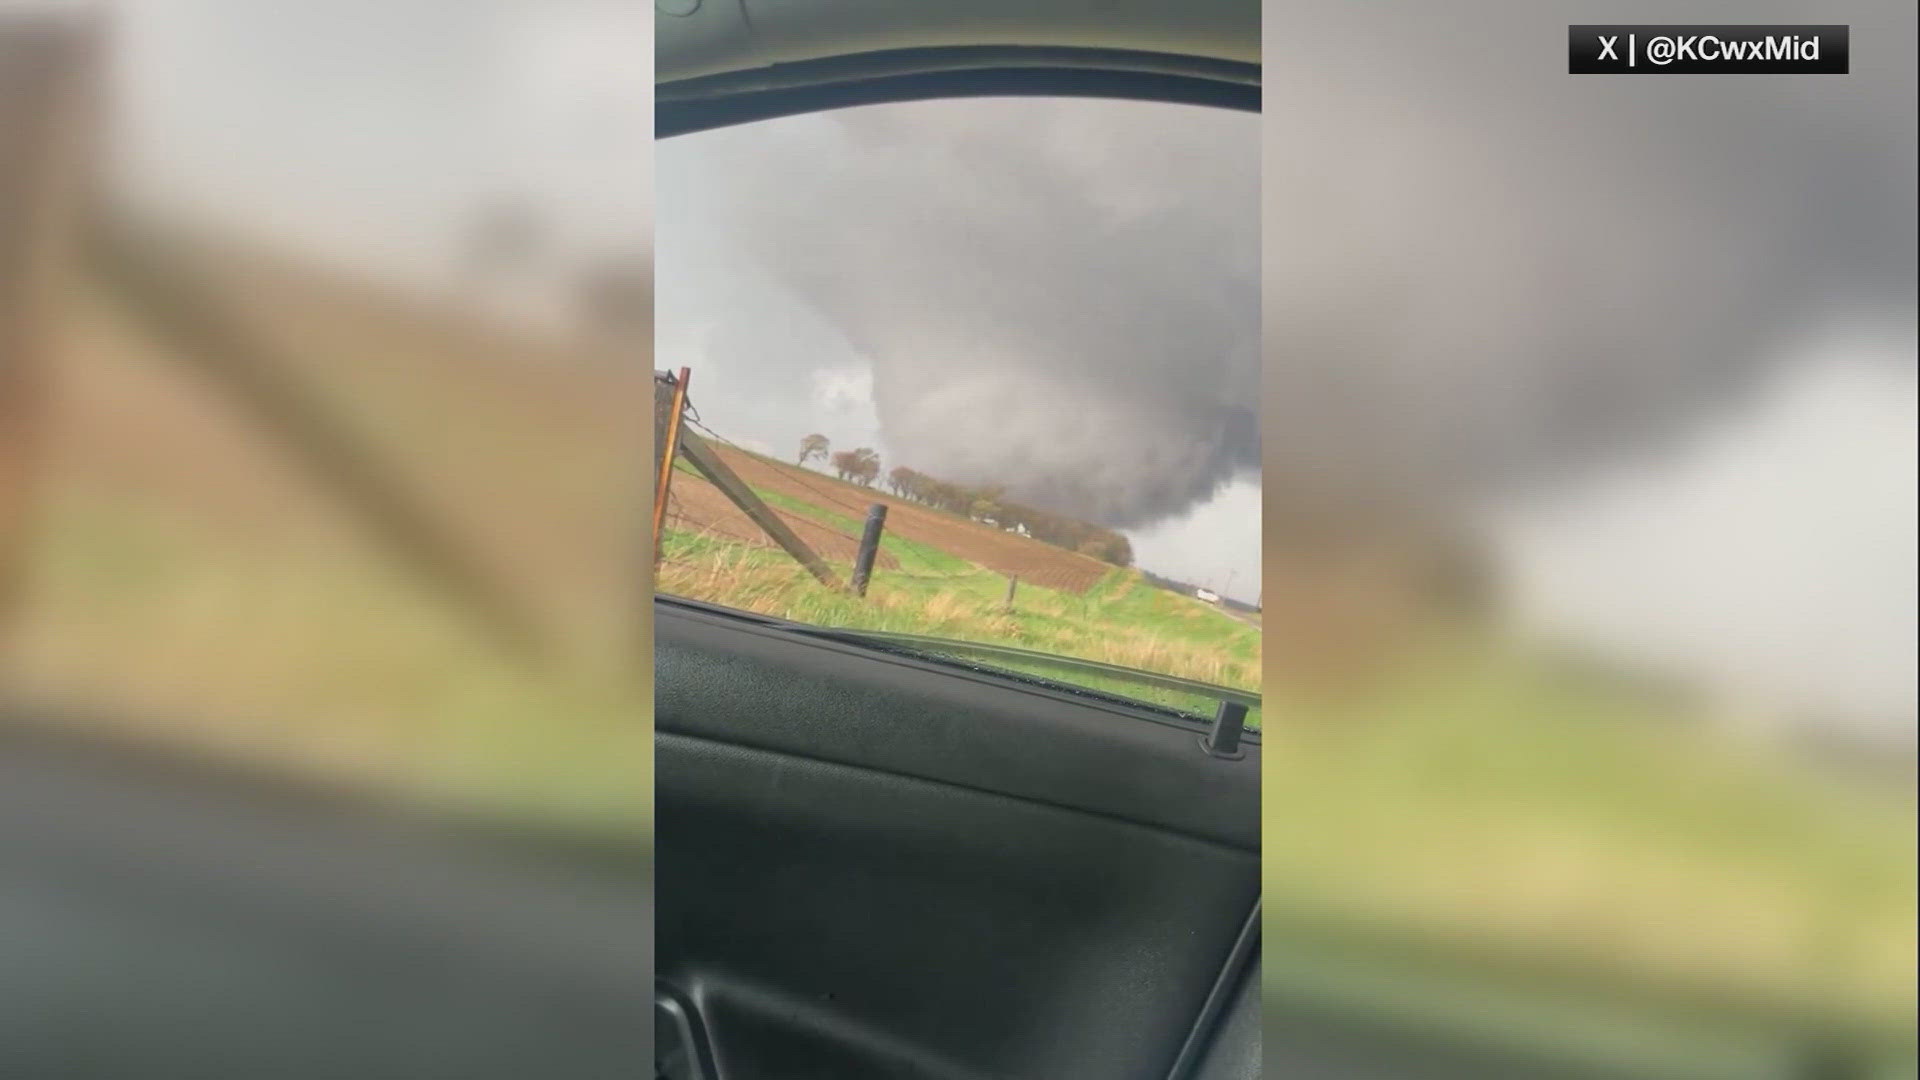 At least four people were killed, including an infant. More than 100 tornadoes were reported, since Friday.